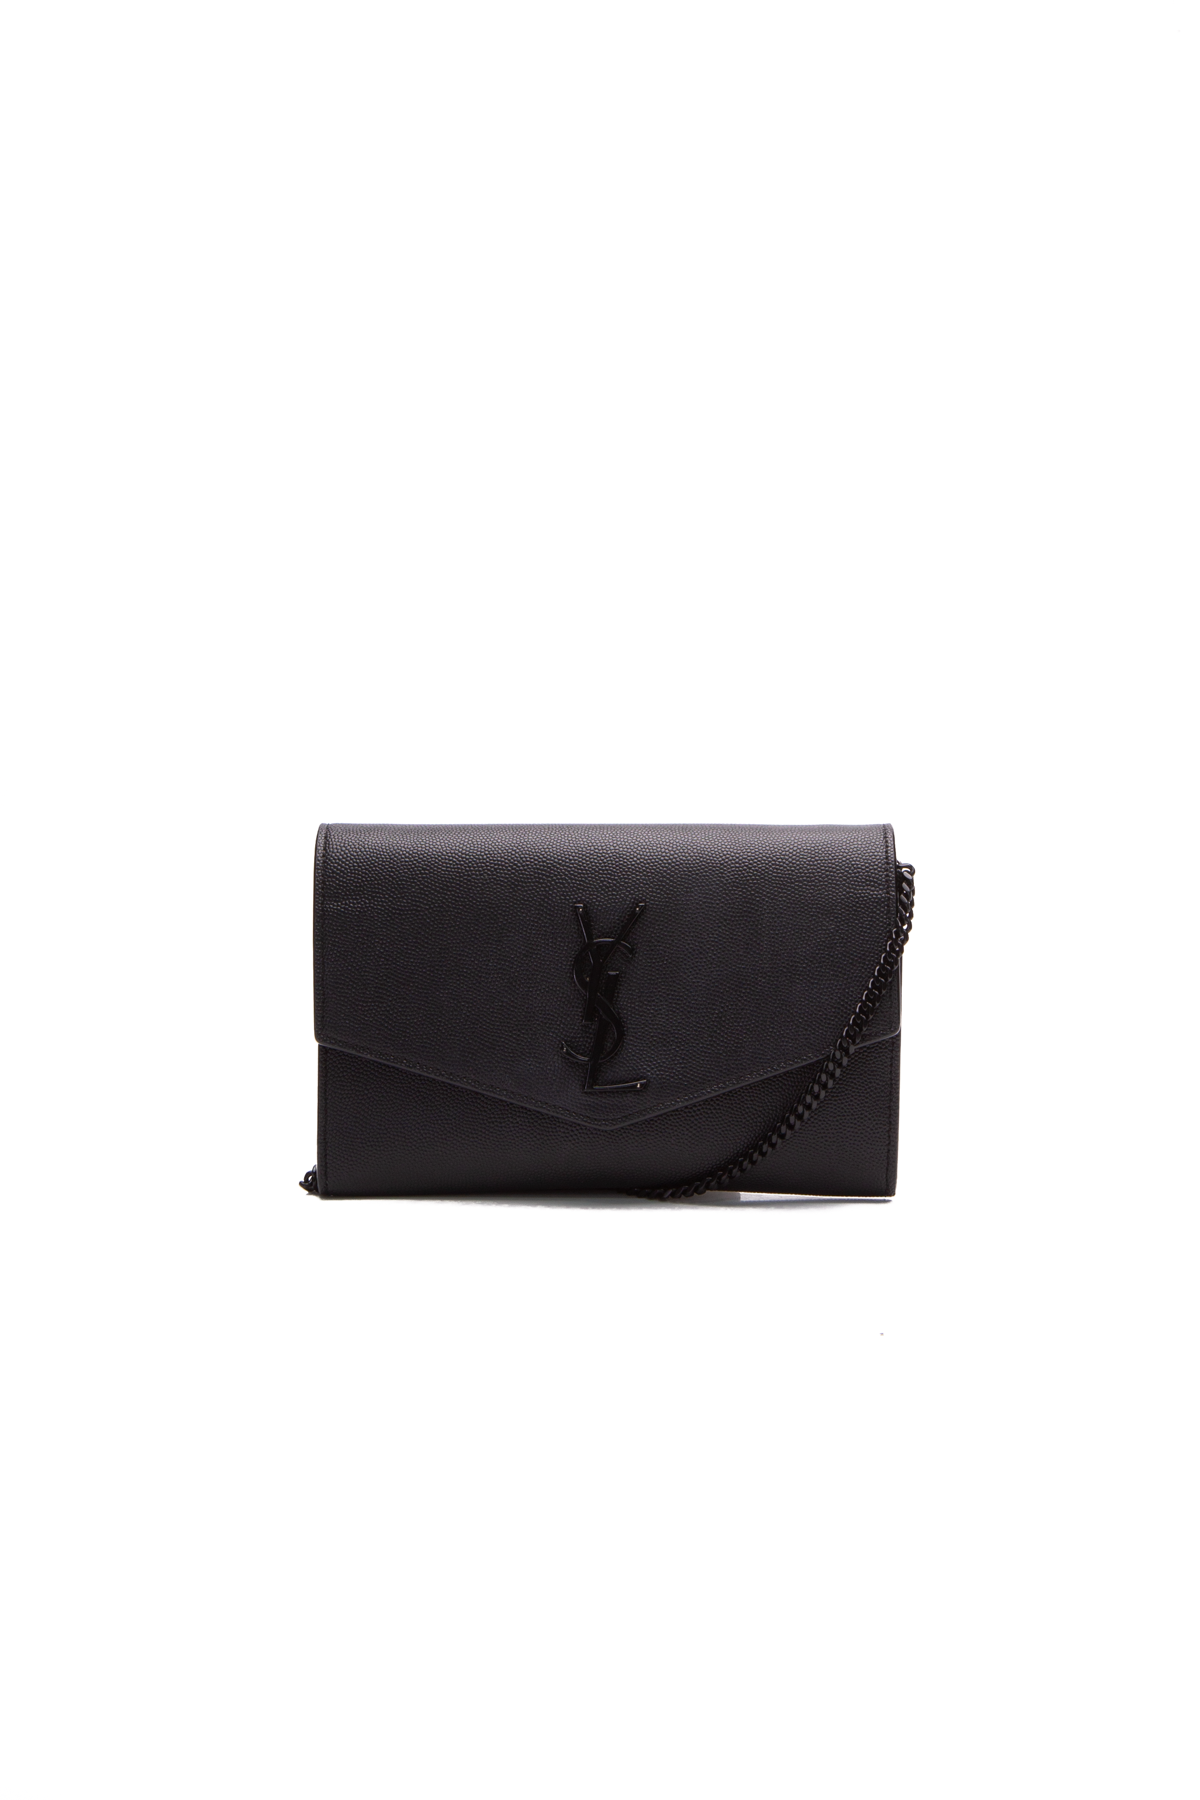 New YSL Uptown Wallet On Chain - Updated Review 